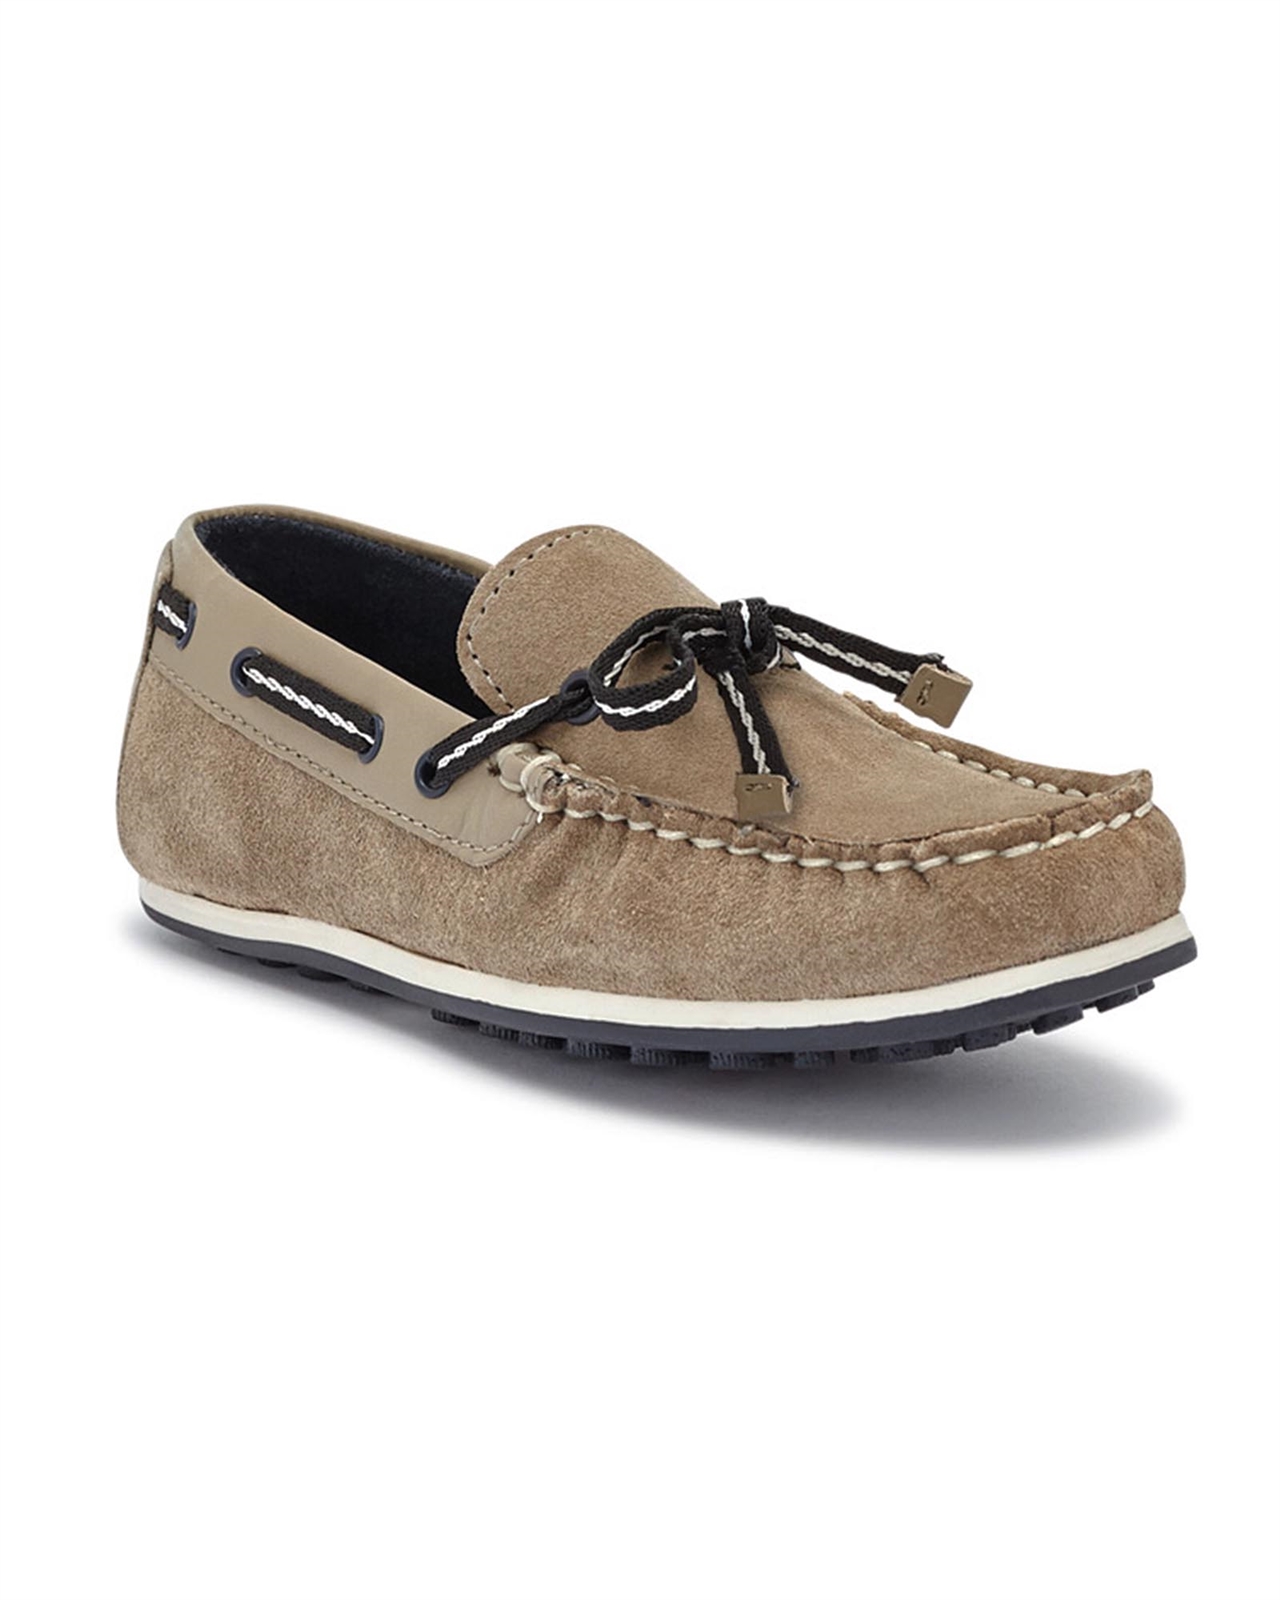 MAYORAL Boys Split Leather Moccasin in Mole - Mayoral Boys' Shoes ...